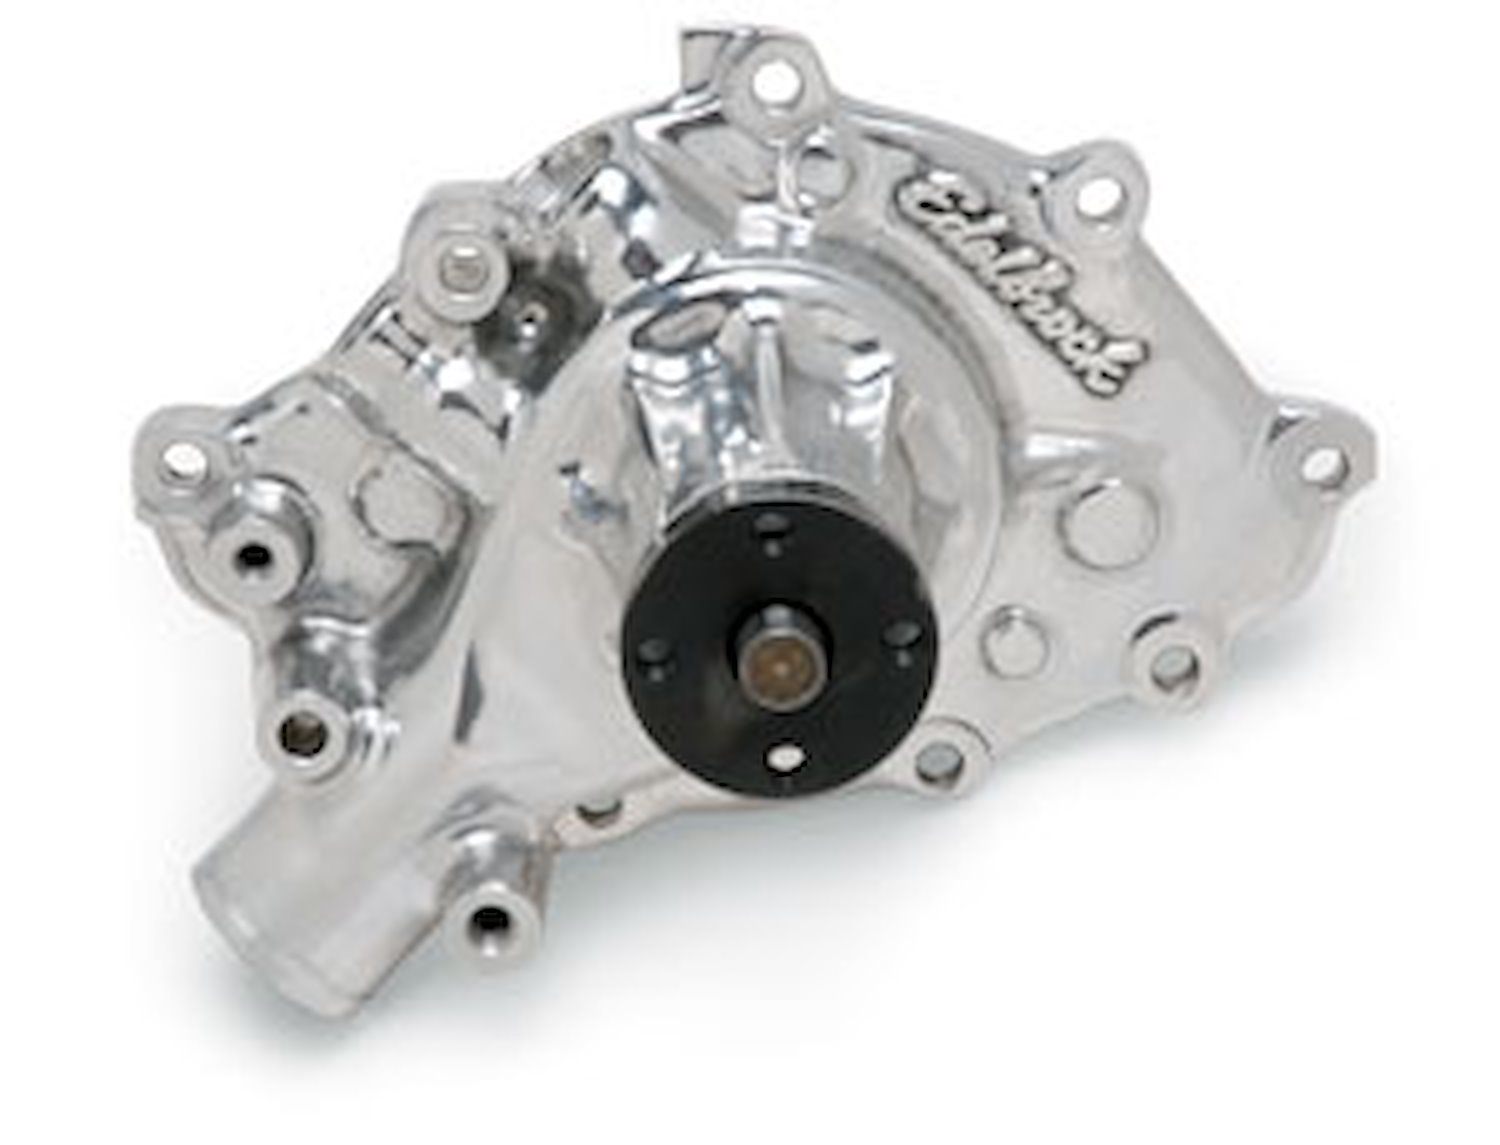 Victor Series Polished Aluminum Water Pump for 1965-1976 Small Block Ford 289 "K" Code Engine